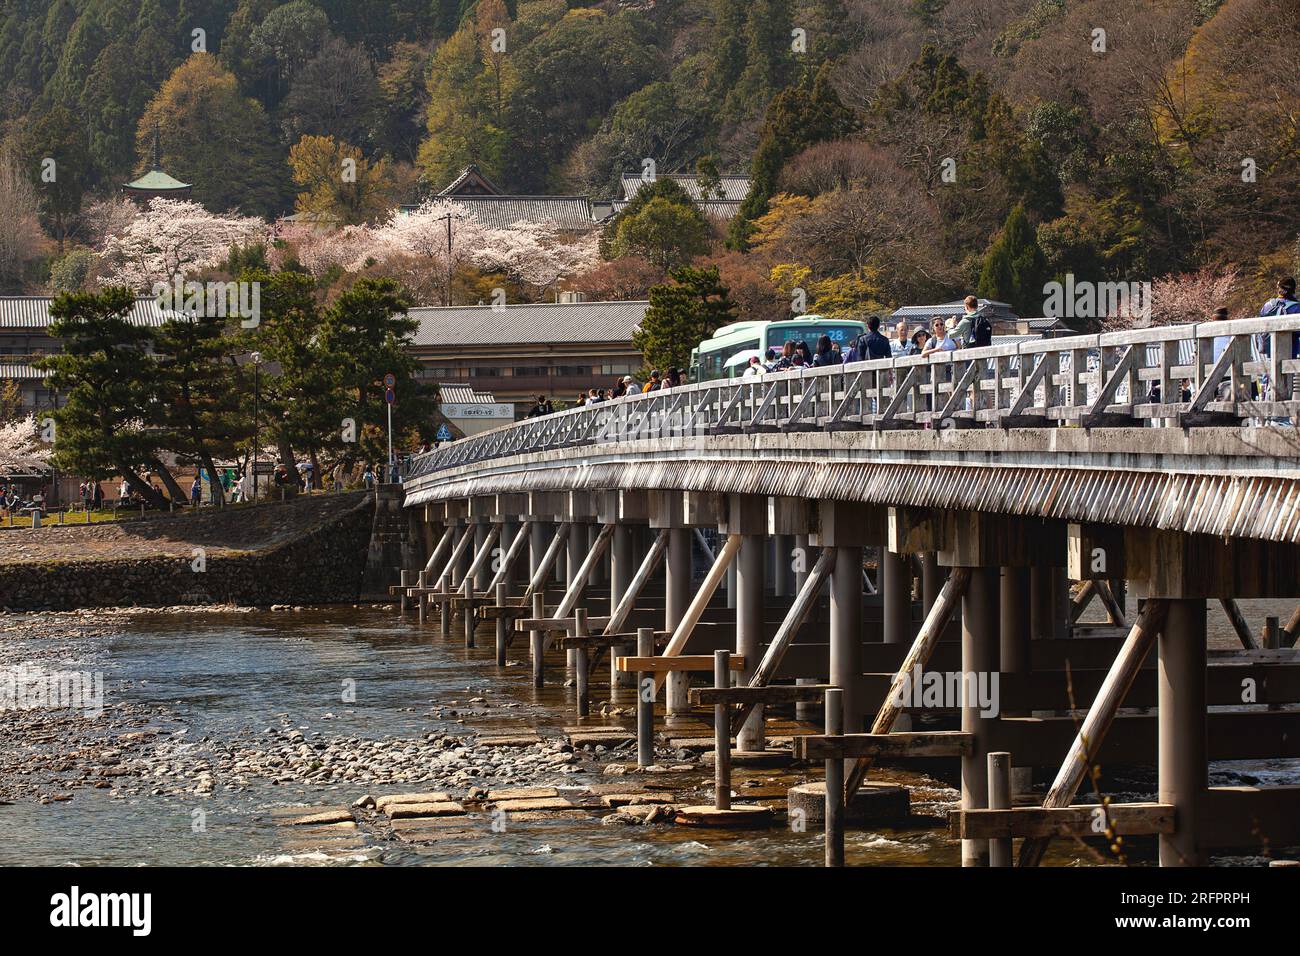 Togetsukyo Bridge - Spring blossoms, fall colors & mountains Stock Photo